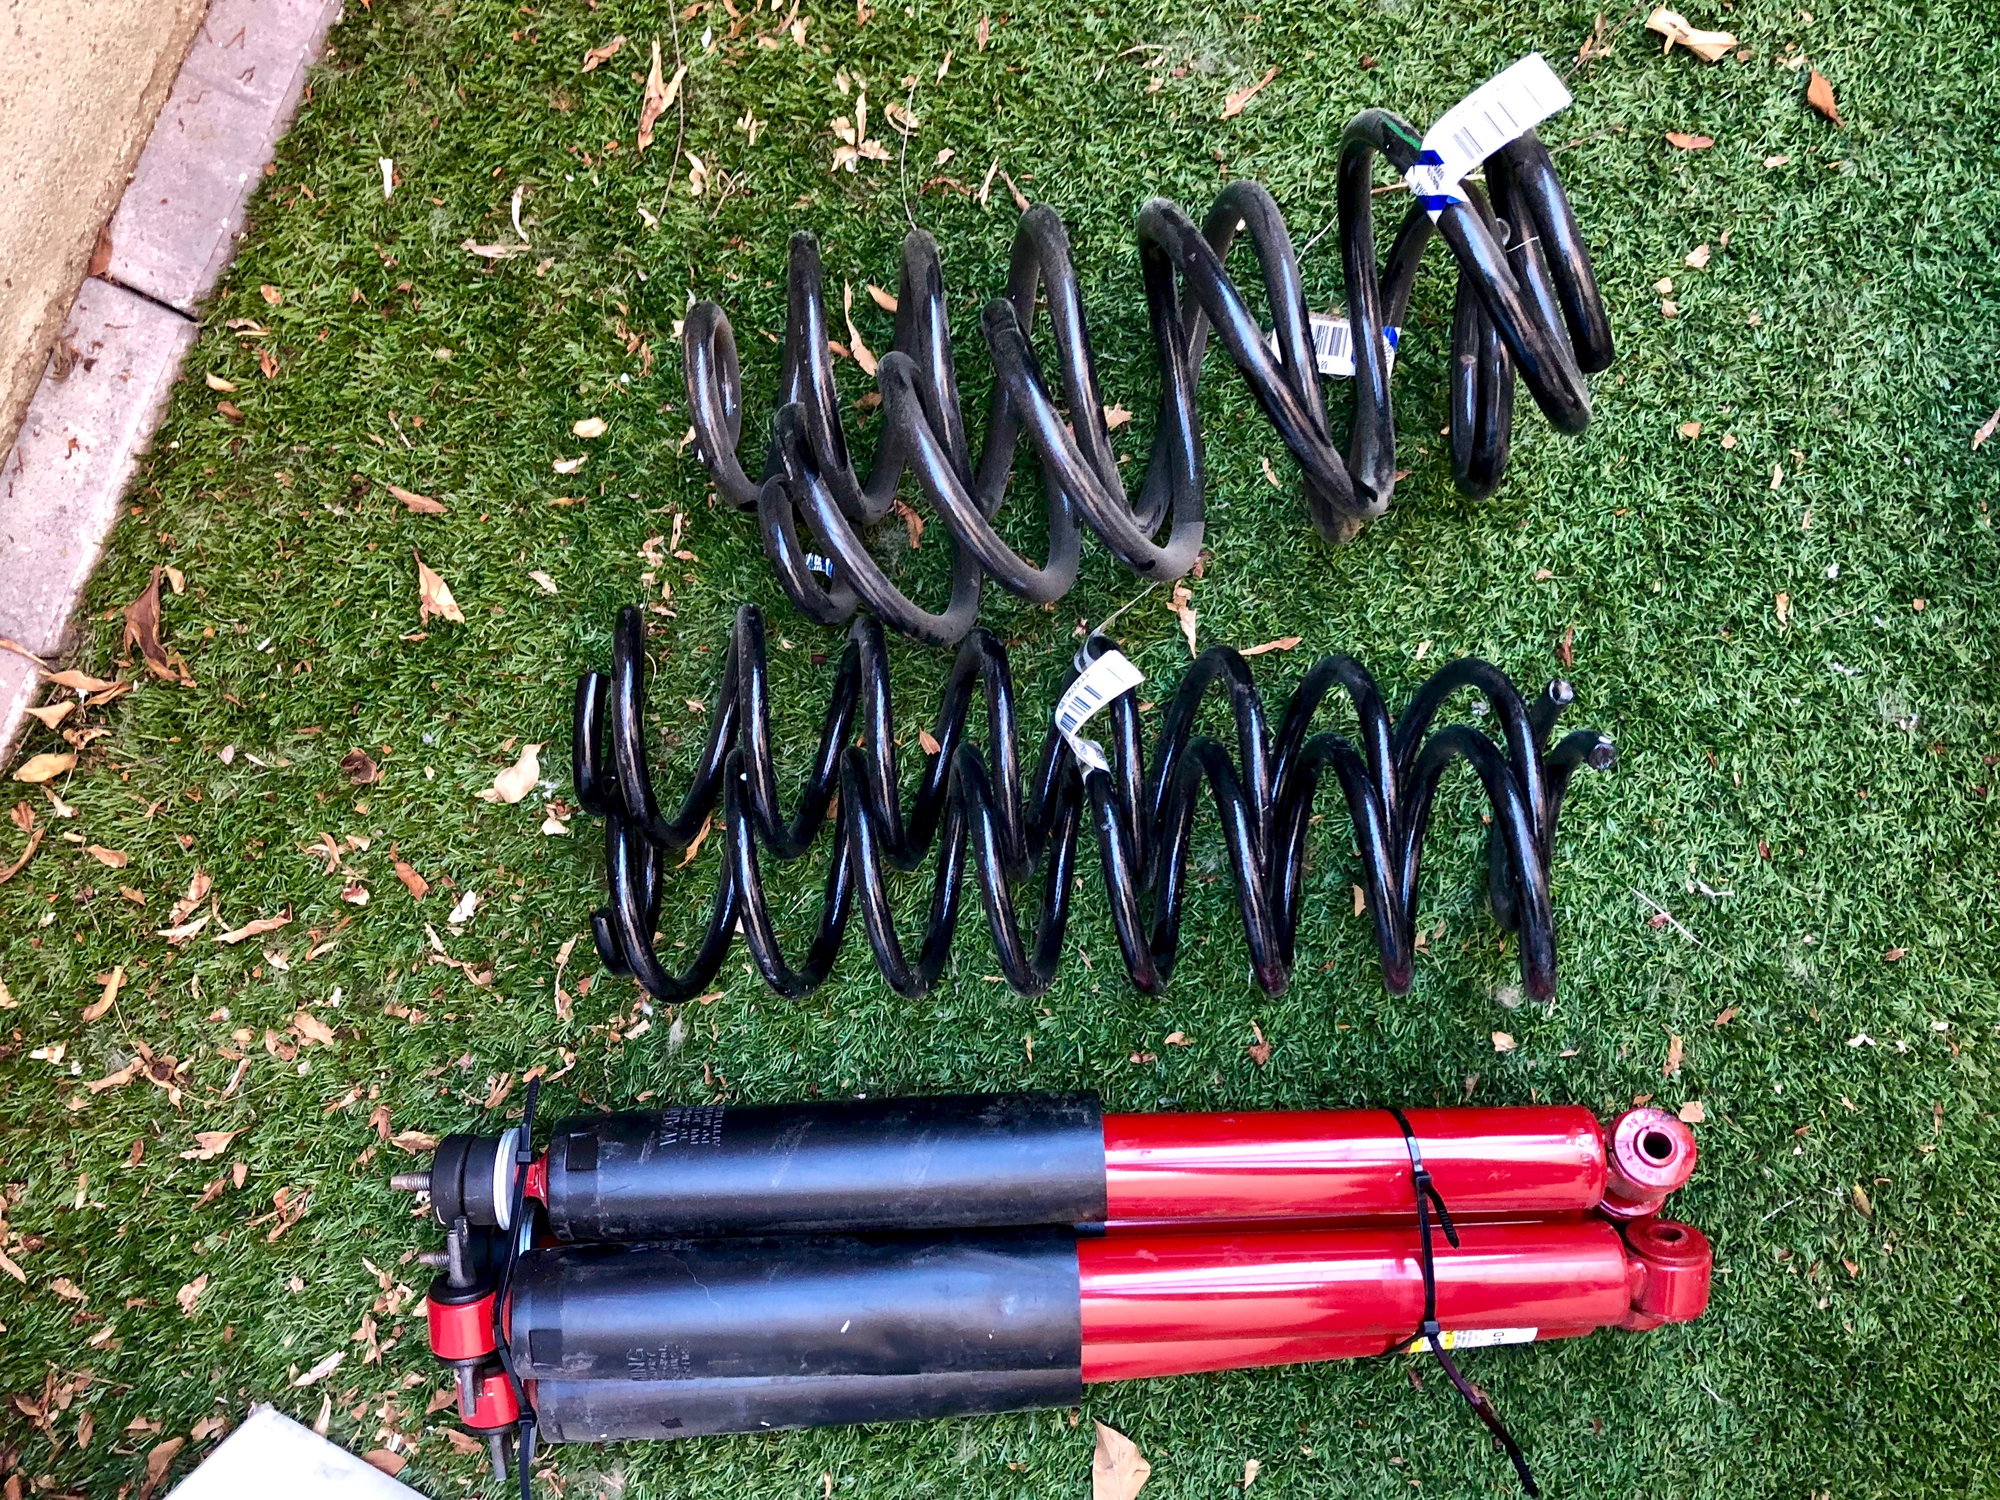 Steering/Suspension - FS: Jeep Wrangler Unlimited Rubicon Recon suspension coil springs & shocks - $100 - Used - 2007 to 2018 Jeep Wrangler - Los Angeles, CA 90066, United States